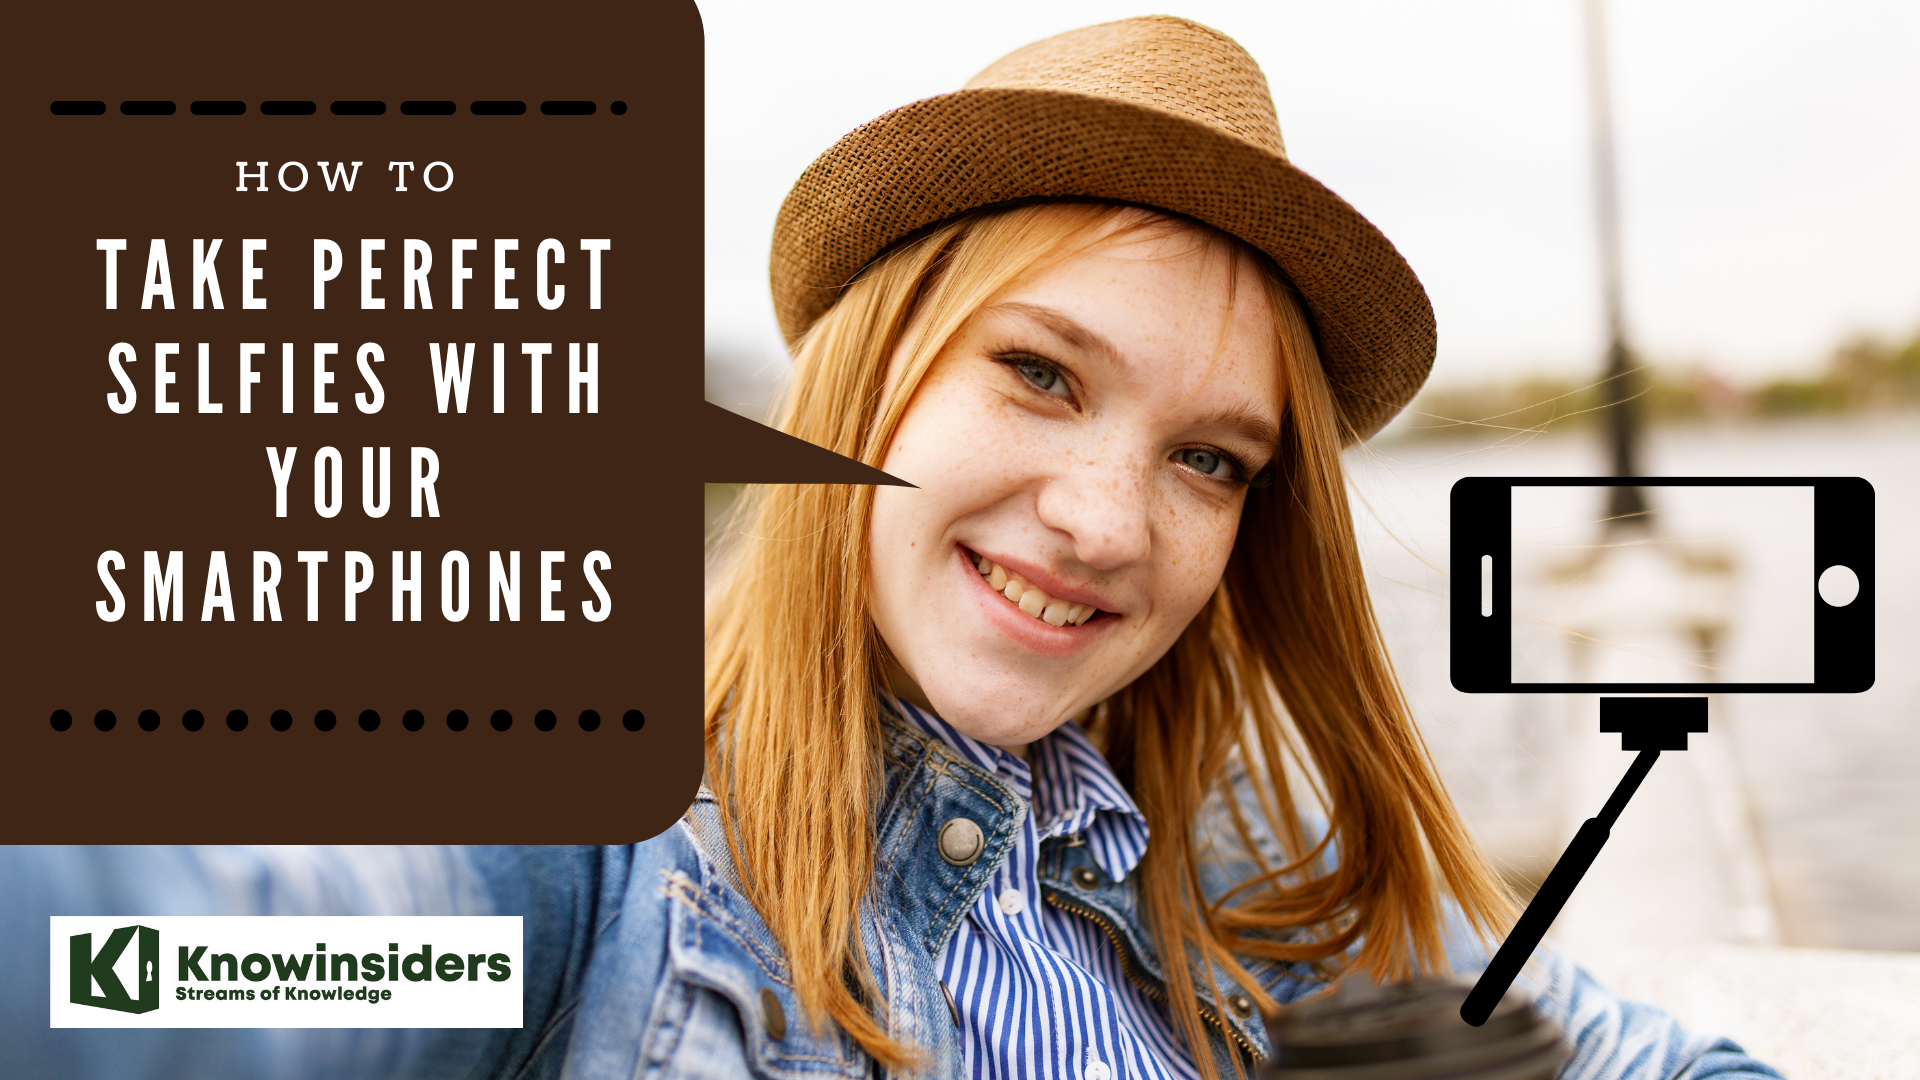 How To Take Perfect Selfies: 10 Simple and Useful Tips